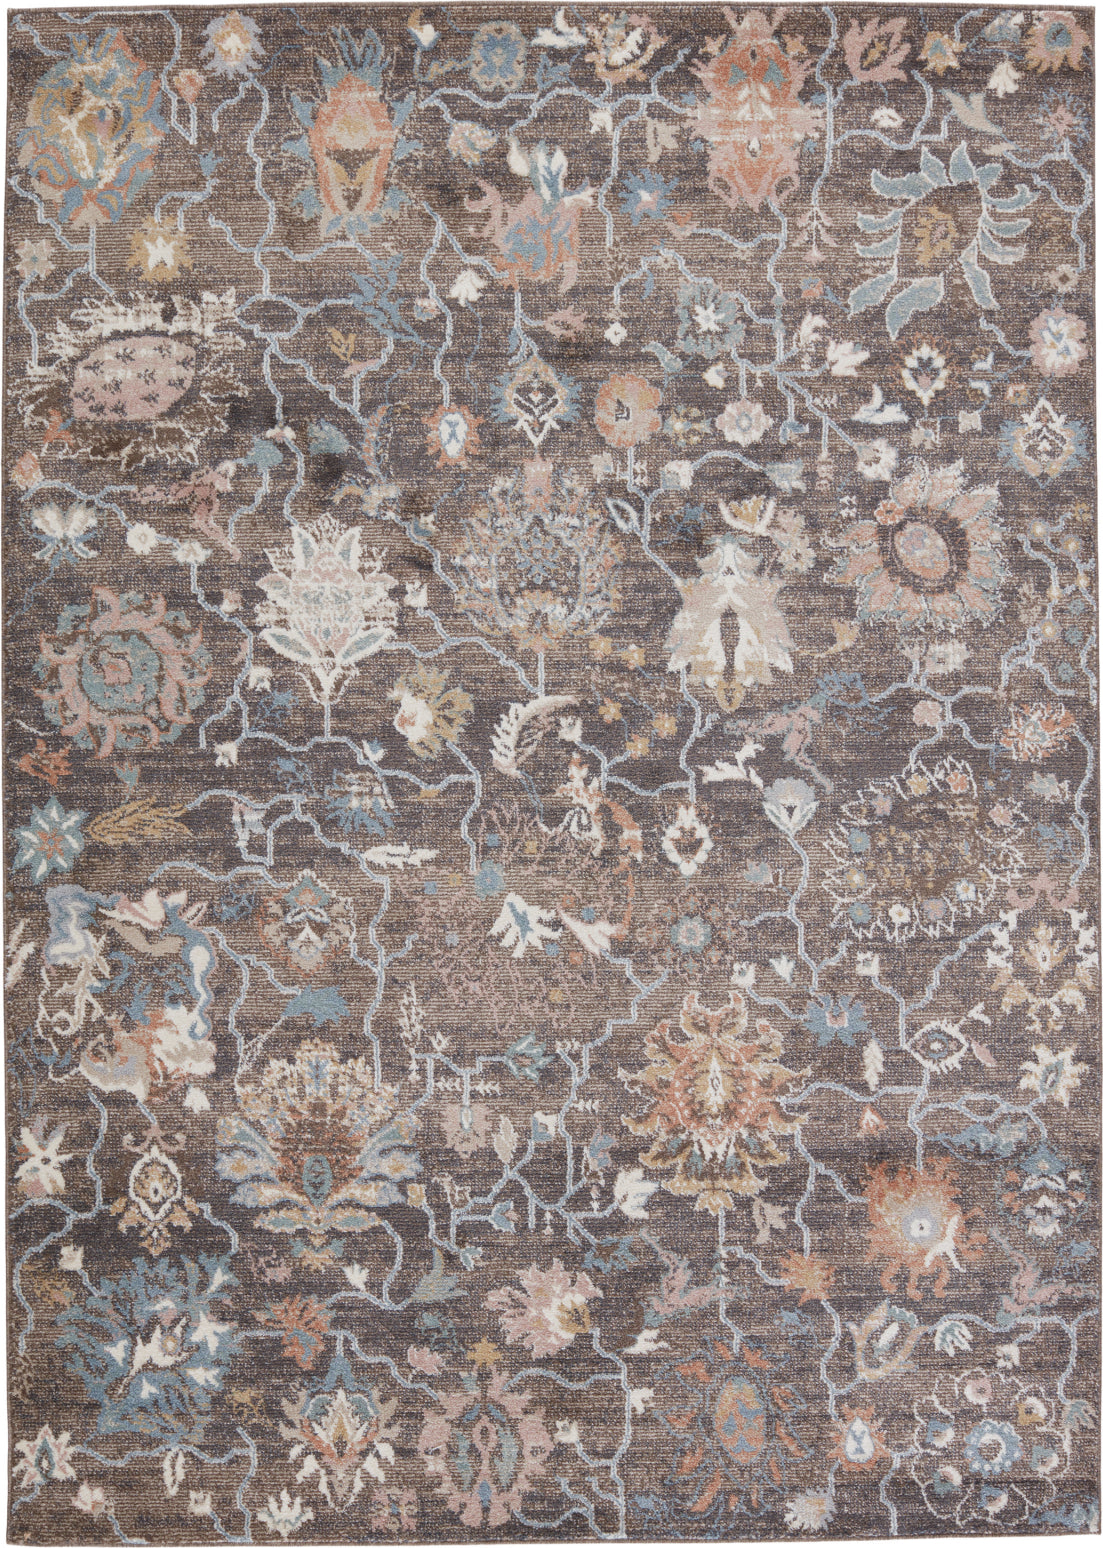 Jaipur Living Abrielle Feyre ABL06 Brown/Blue Area Rug by Vibe Main Image